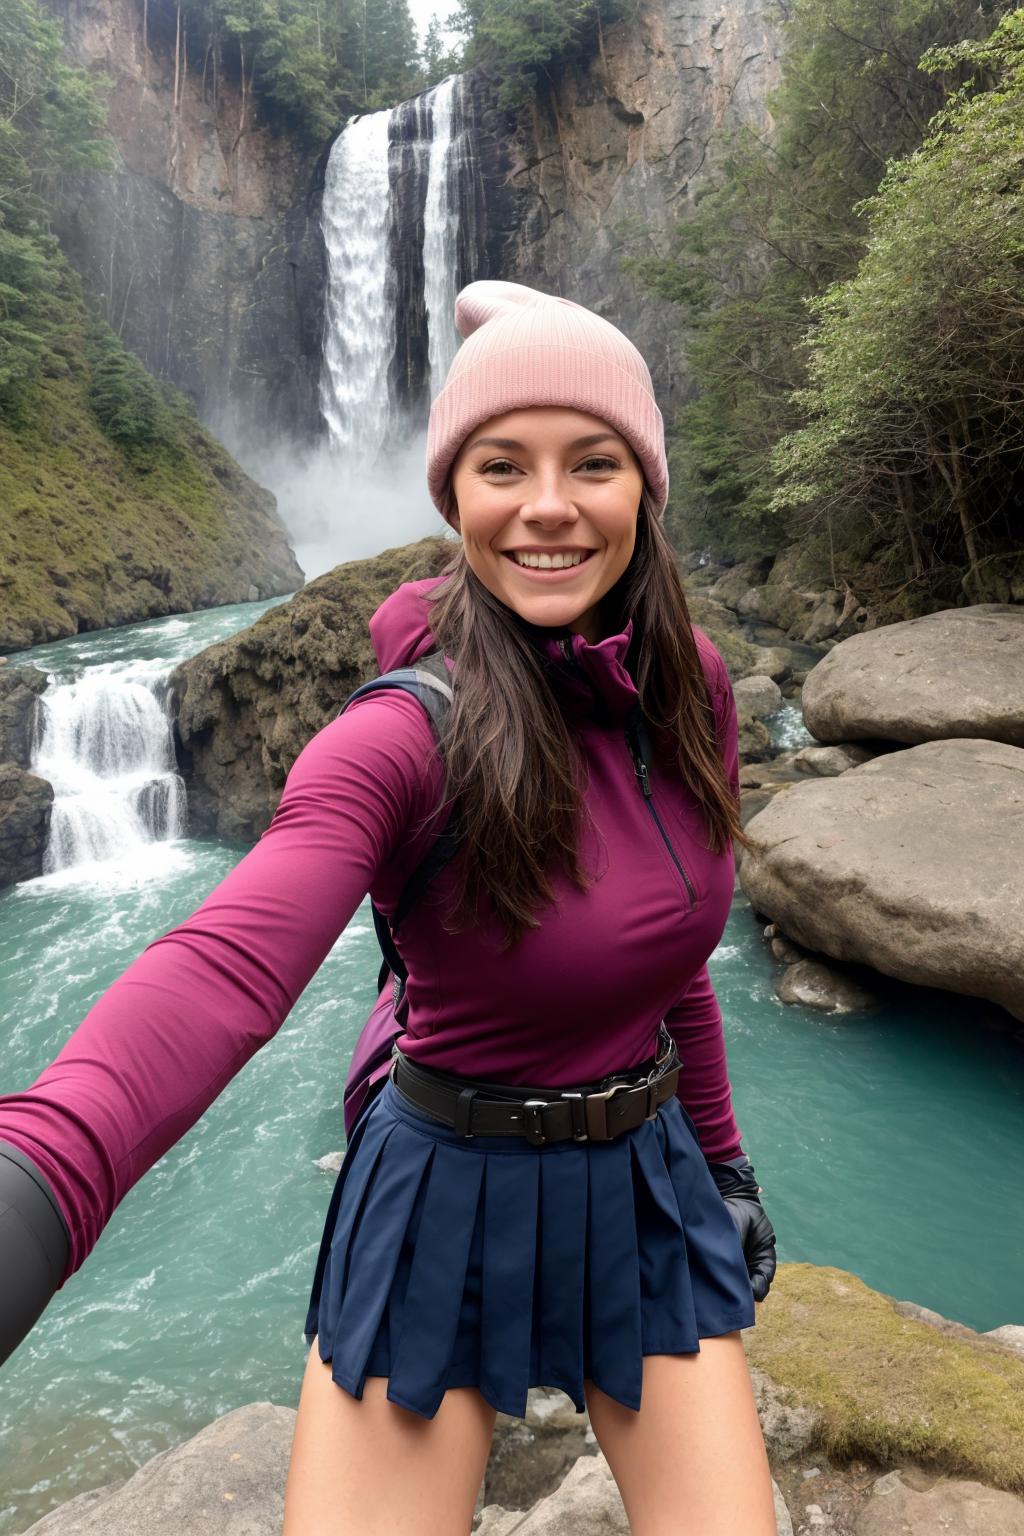 A woman wearing a pink hat and a purple shirt is standing near a waterfall and smiling.